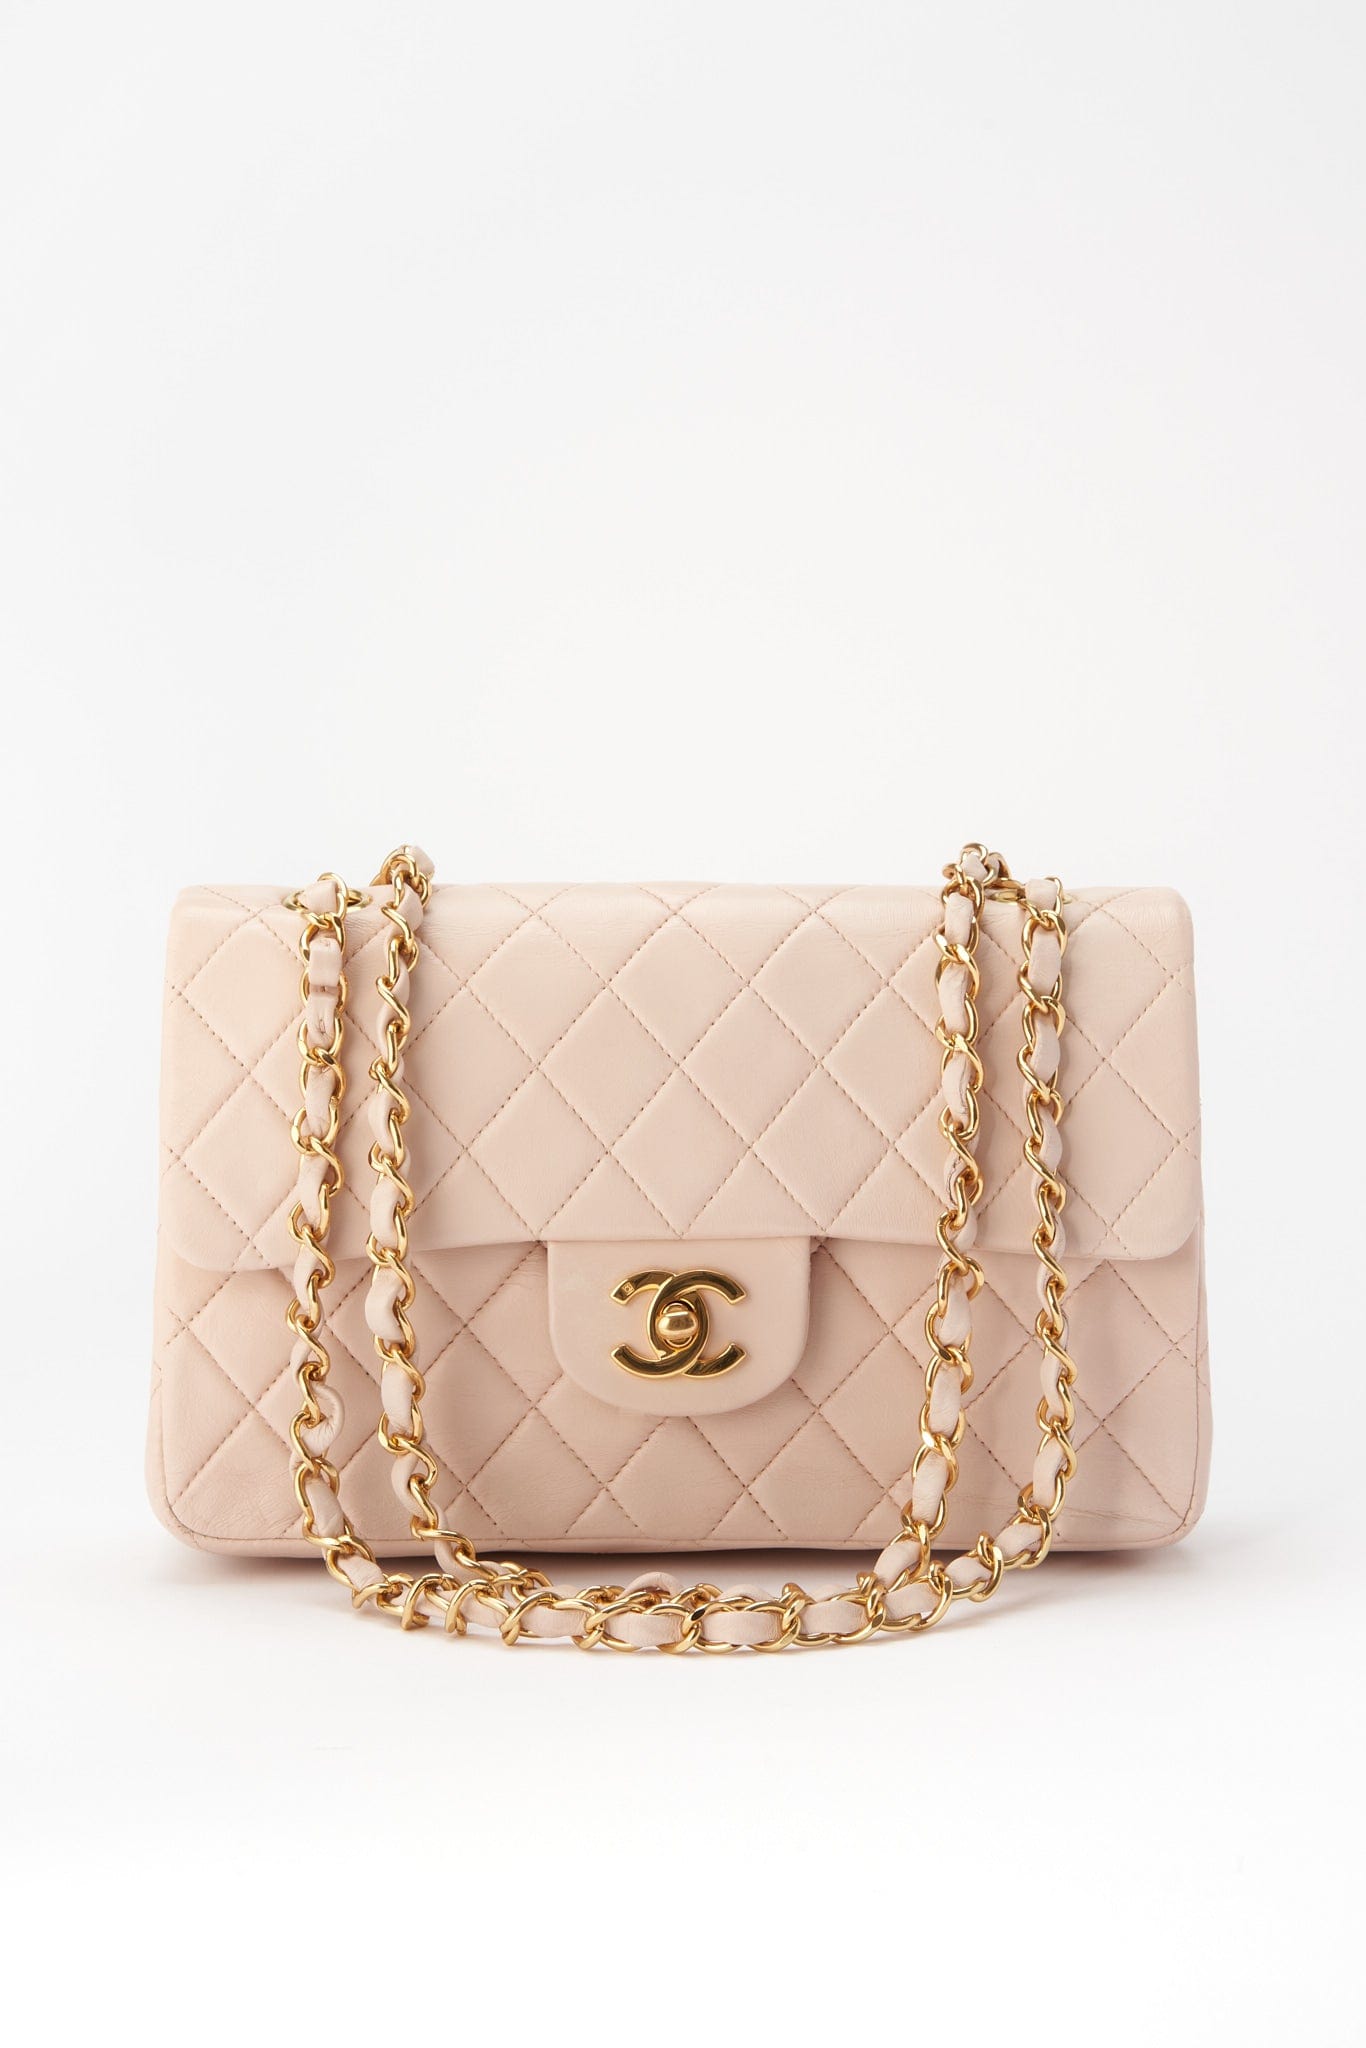 chanel bag double chain